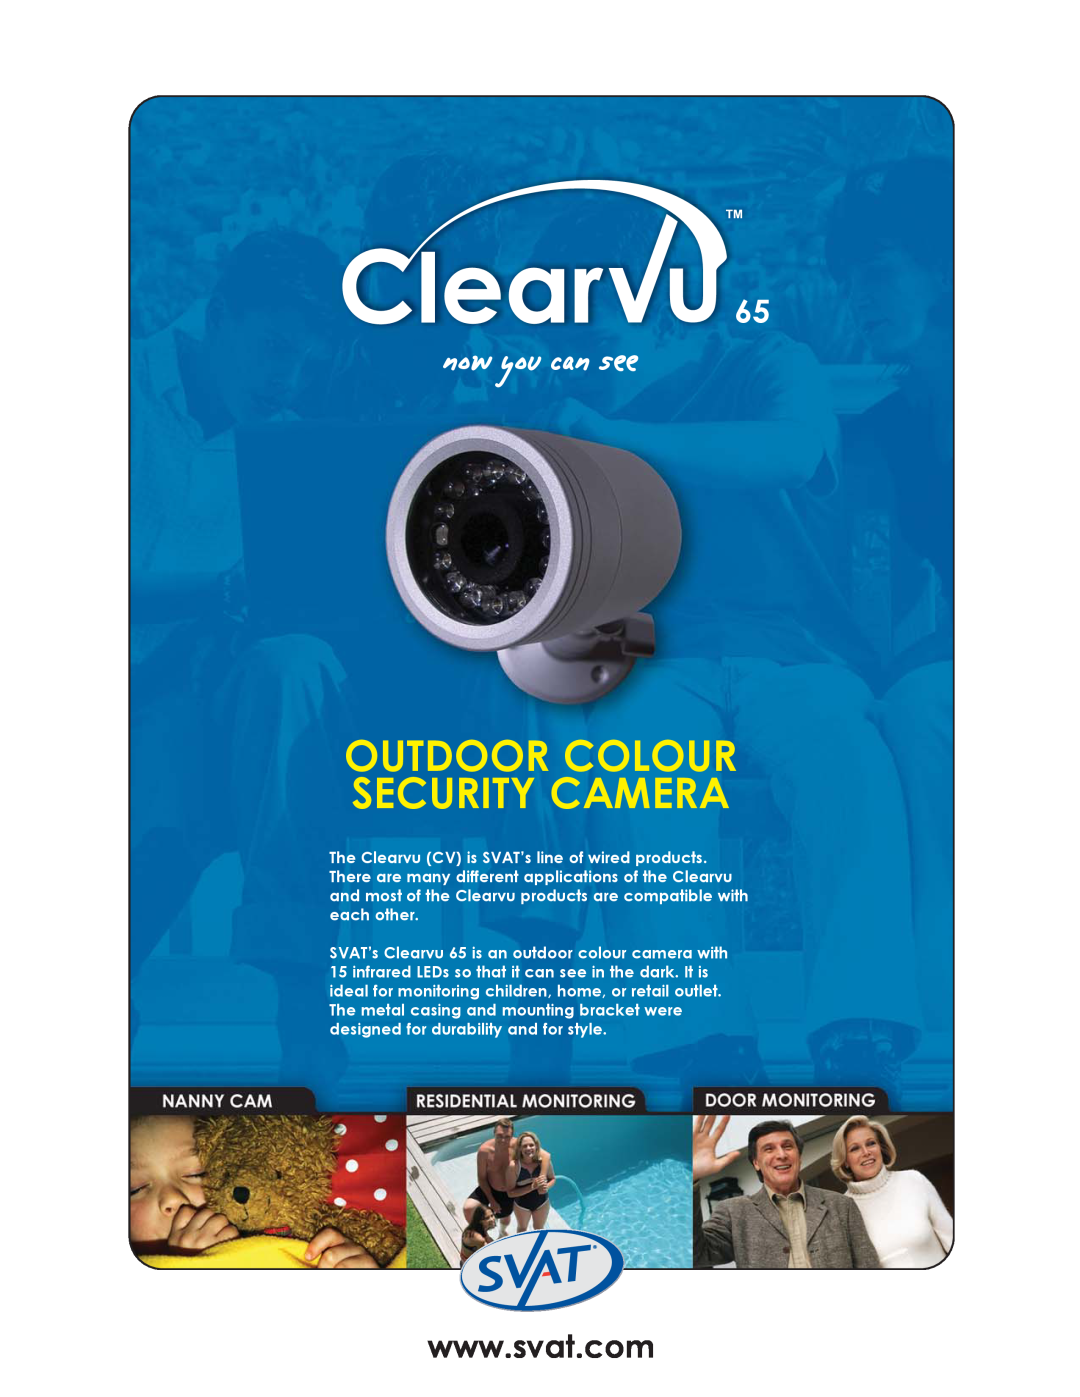 SVAT Electronics Clearvu65 manual now you can see, Outdoor Colour Security Camera 